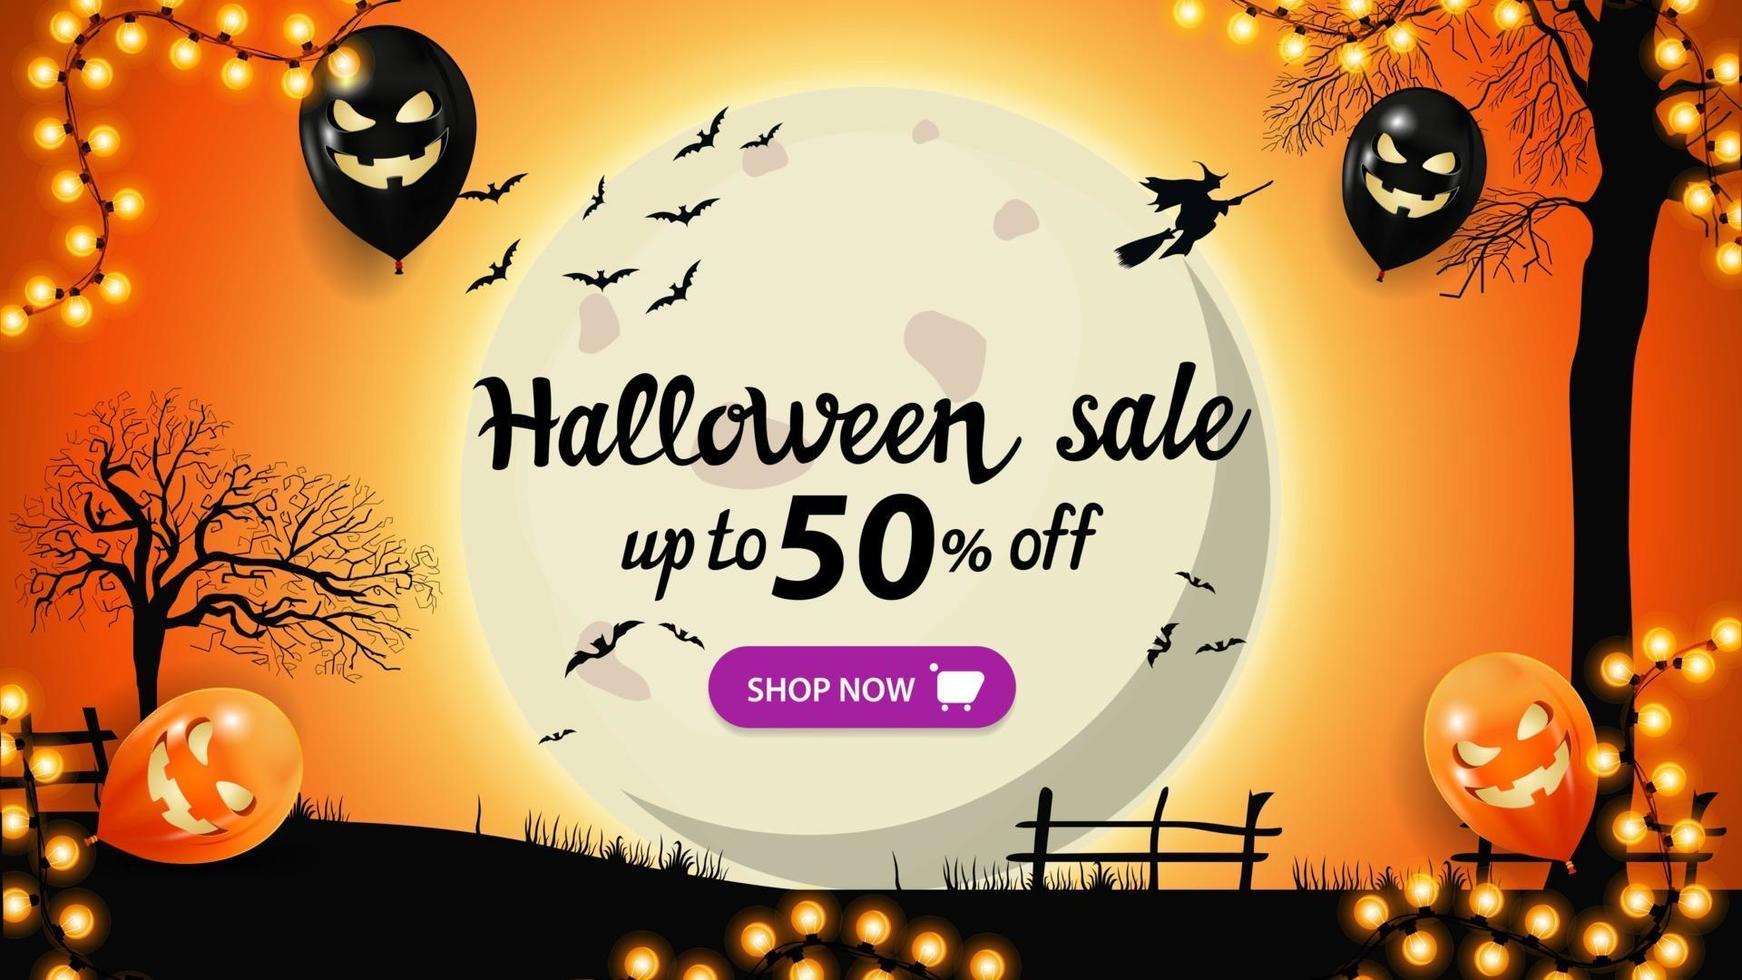 Halloween sale, up to 50 off, orange banner with halloween landscape on the background. Halloween background, night landscape with big yellow full moon, old trees and witches in the sky vector